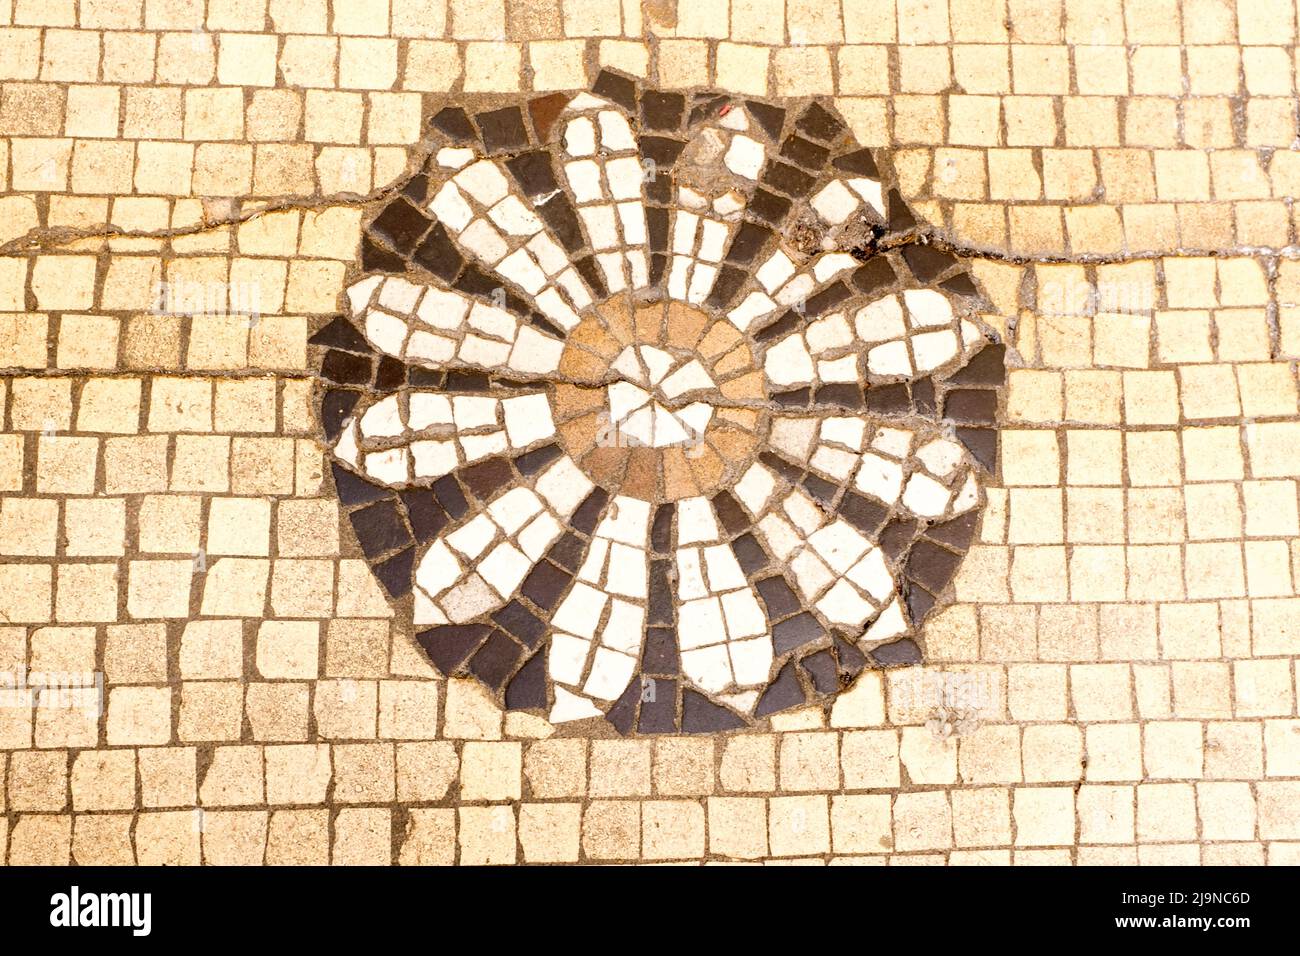 Daisy mosaic design on the floor of a shop entrance in Colchester,Essex, United Kingdom Stock Photo